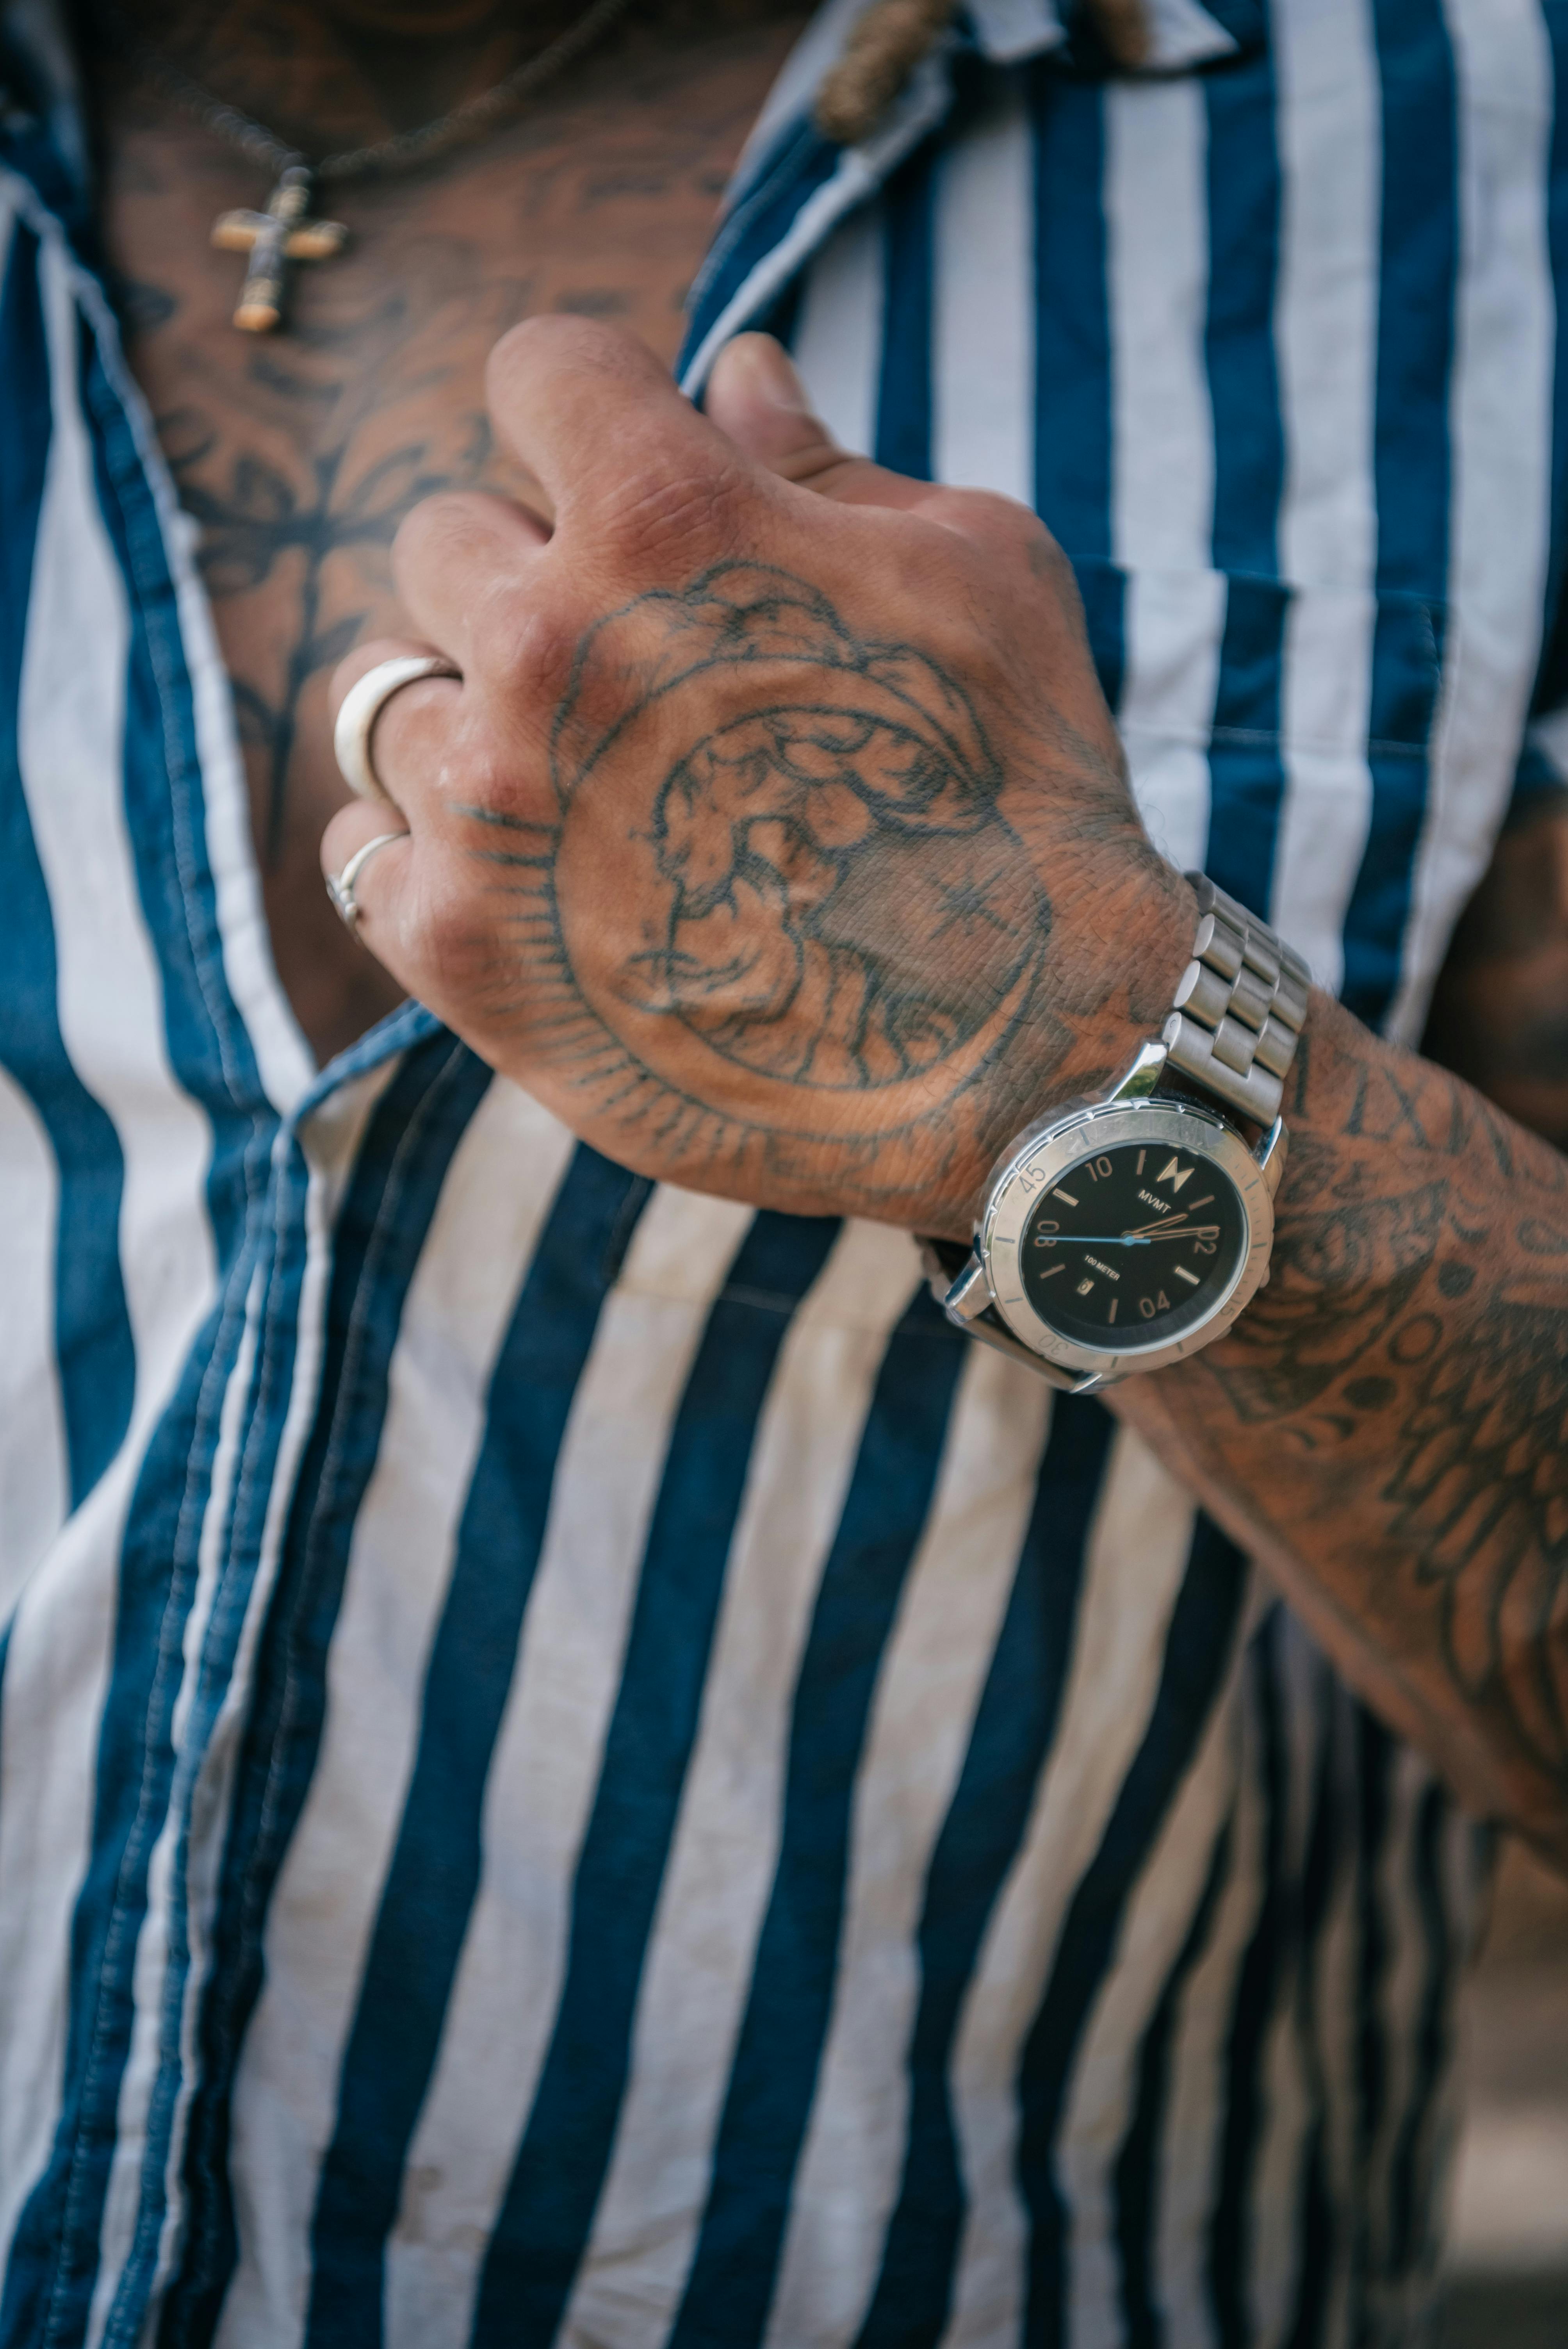 Tattoo Care The Best Ways to Protect Tattoos Over Time